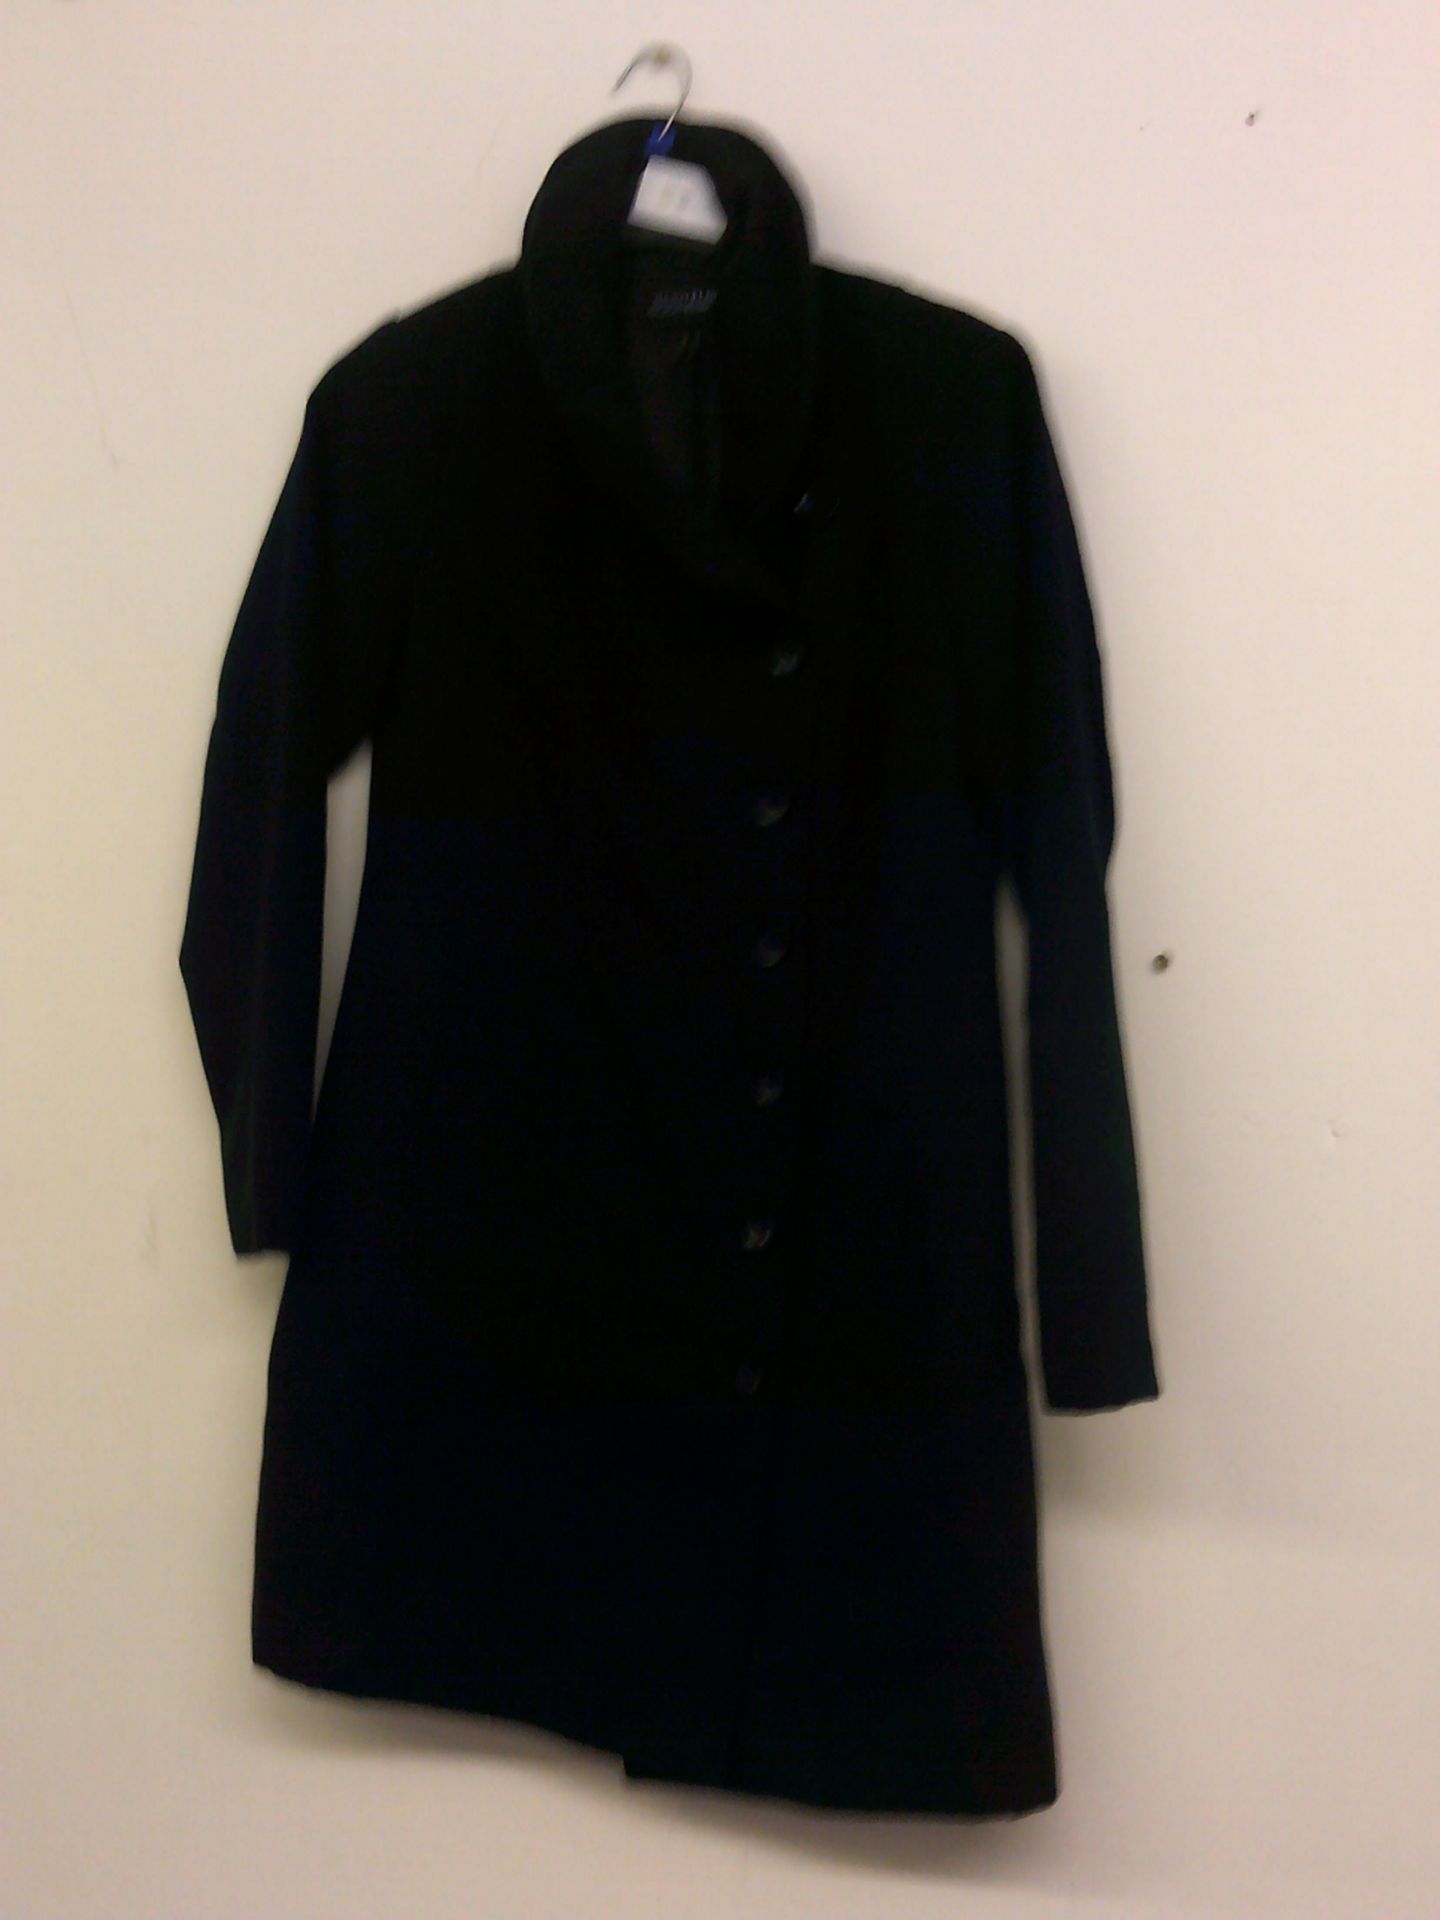 BODYFLIRT BLACK LINED COAT WITH SIDE BUTTON FASTENING SIZE 14